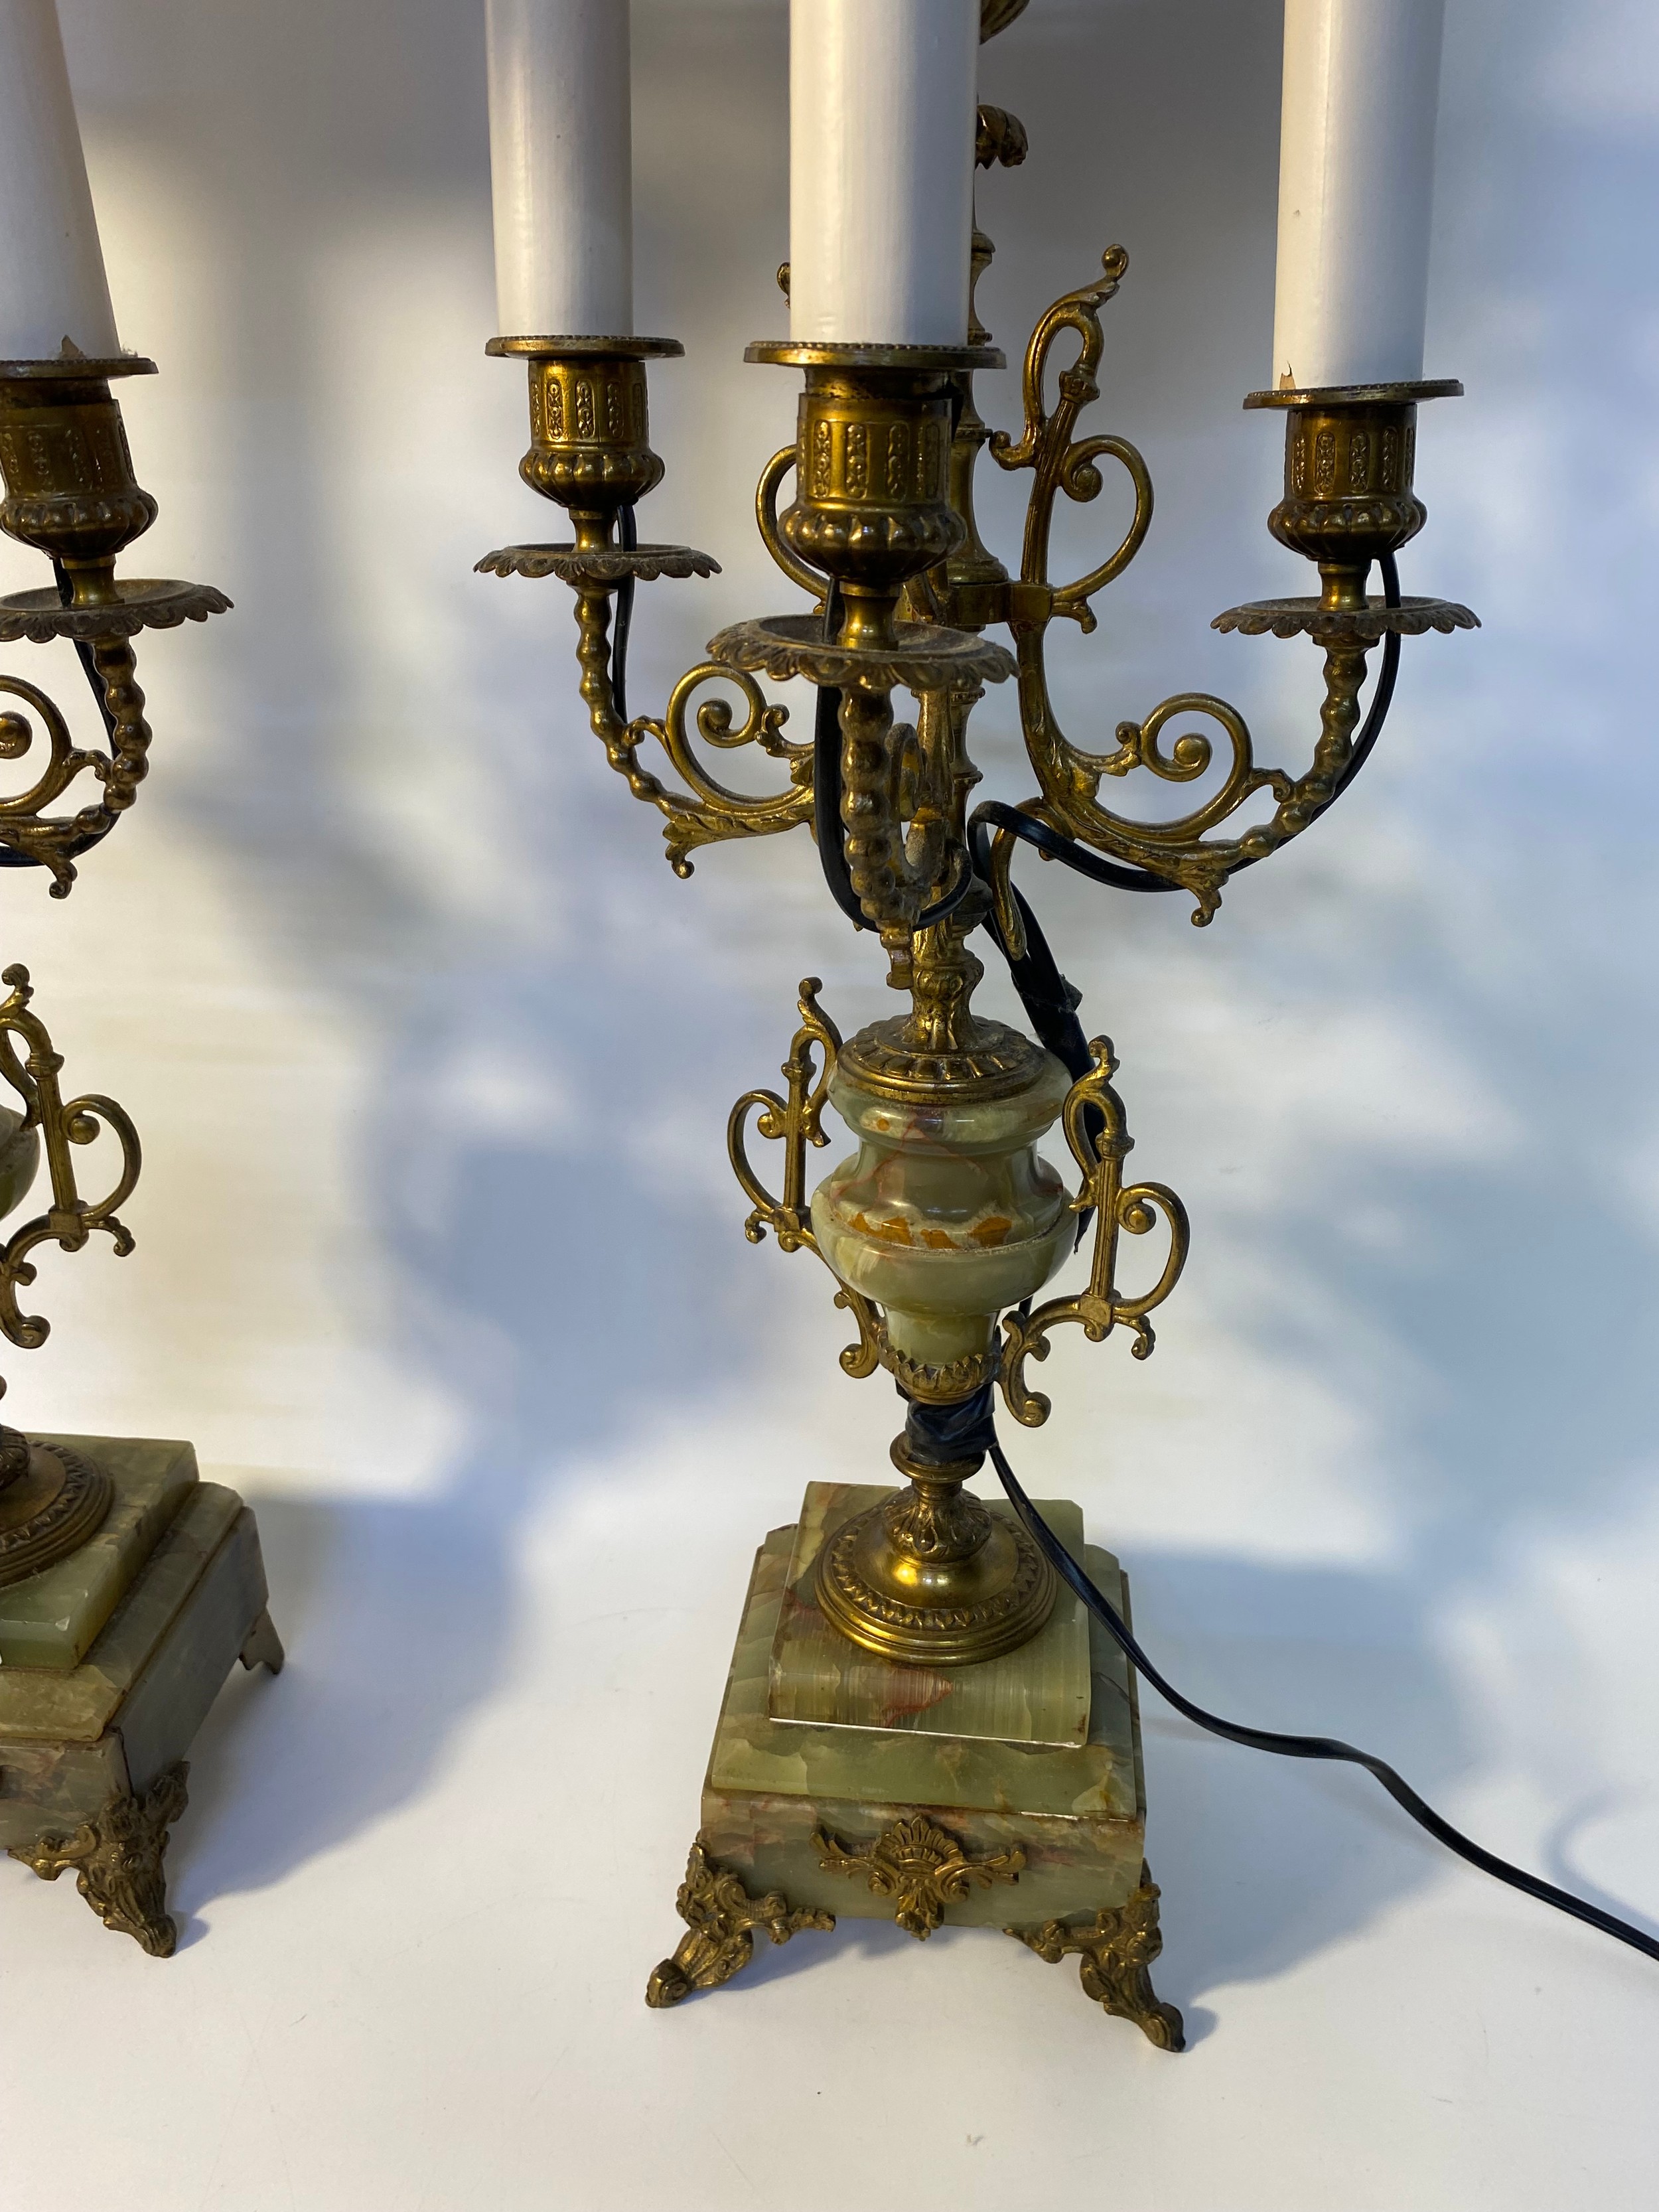 Pair of 19th century 3 branch onyx/brass candlesticks Converted to table lamps with fitted shades - Image 2 of 3